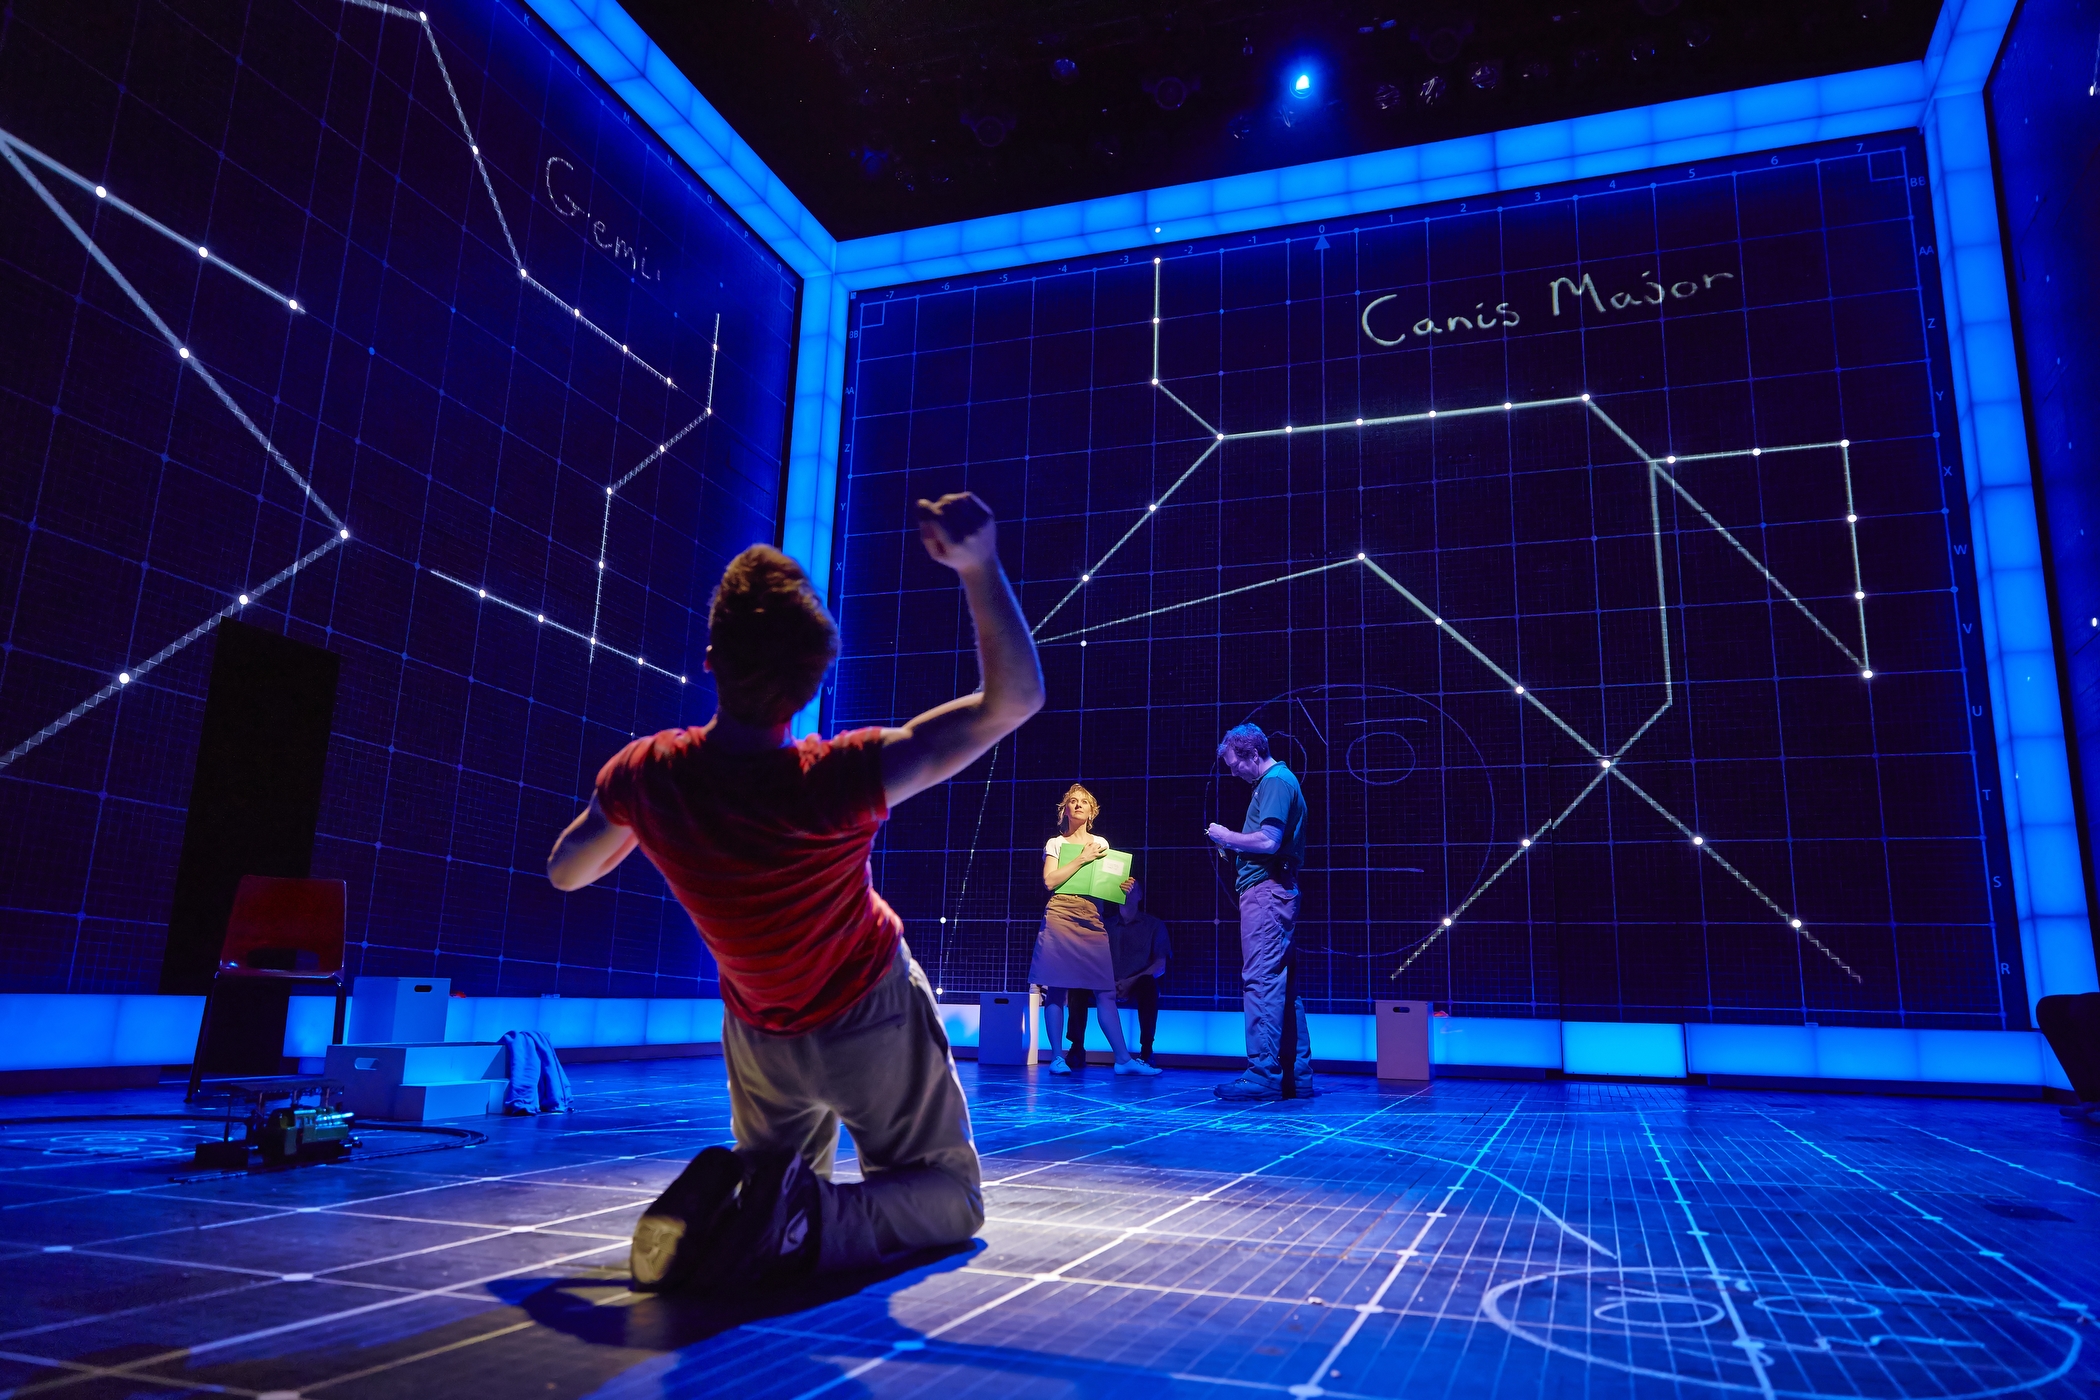   The Curious Incident of the Dog in the Night-Time , NT, Apollo Theatre, London 